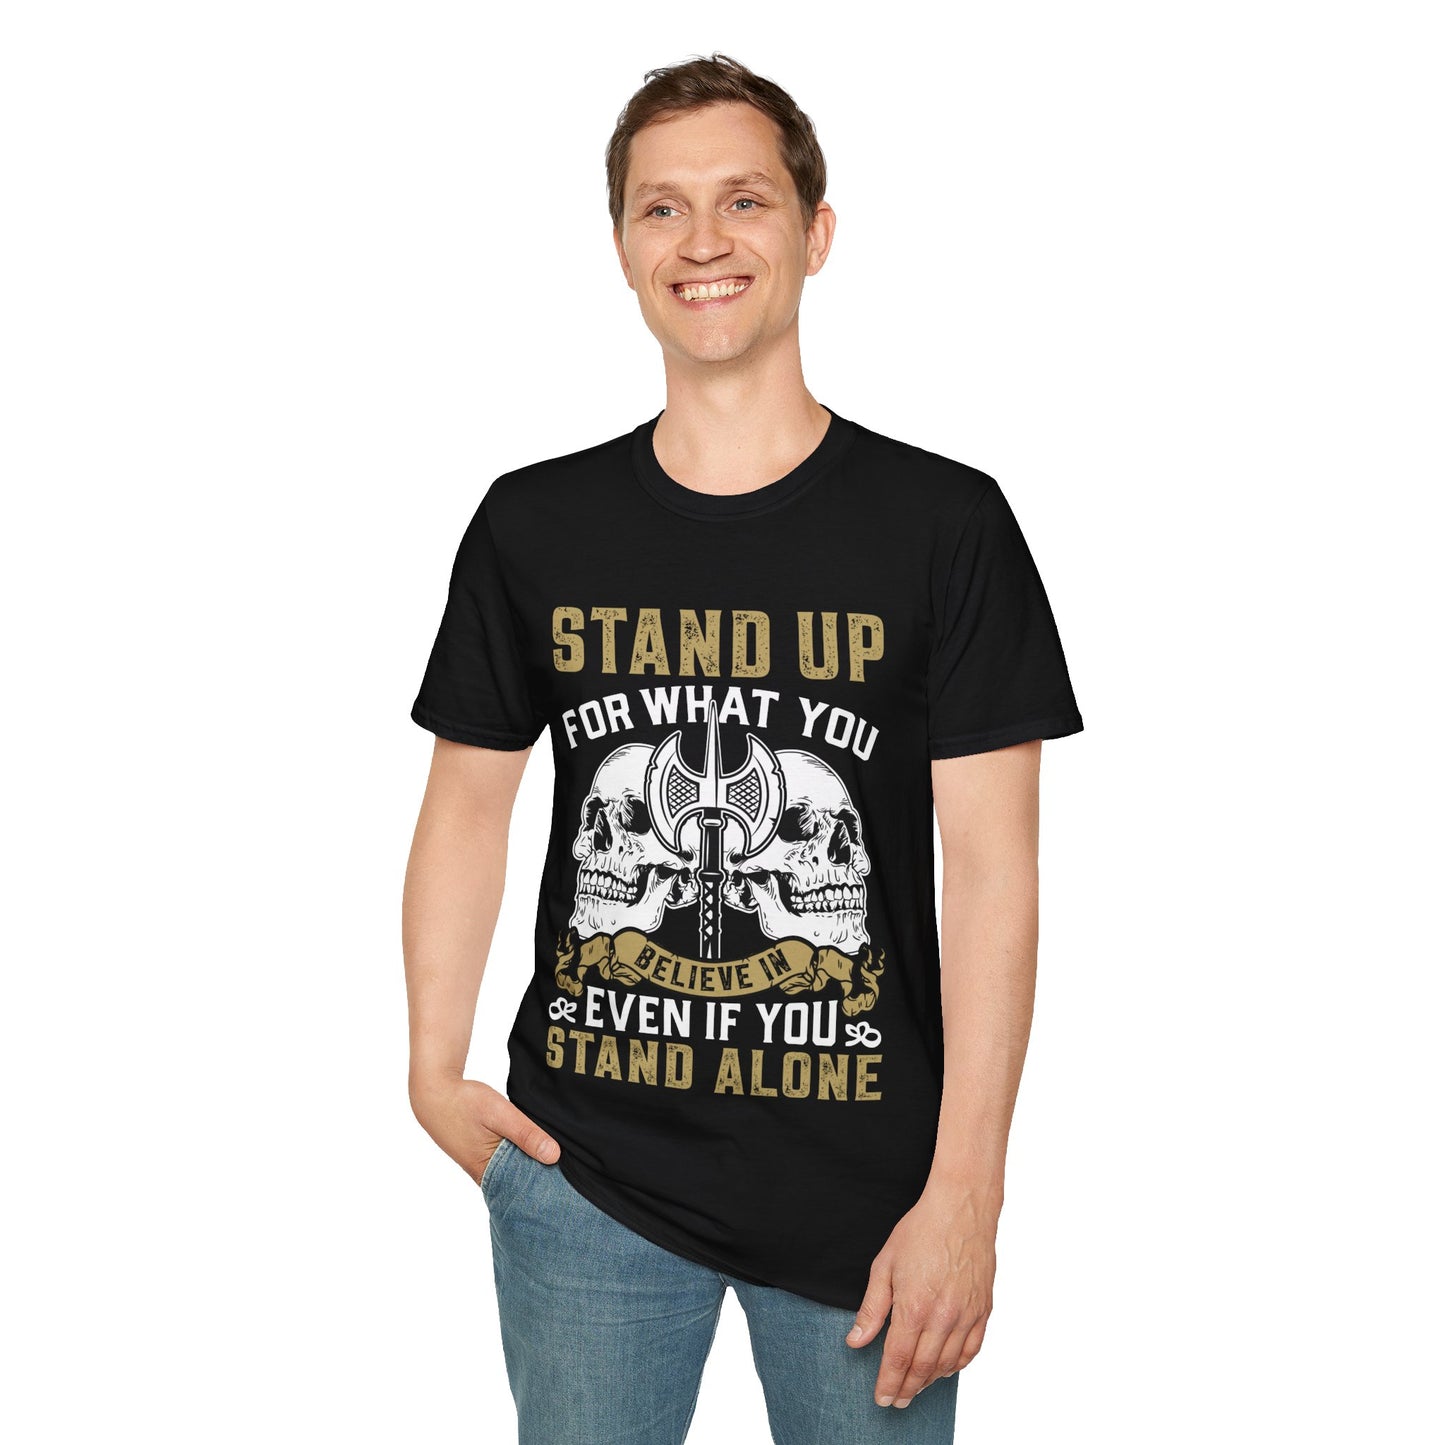 Stand Up For What You Believe In Even If You Stand Alone Viking T-Shirt